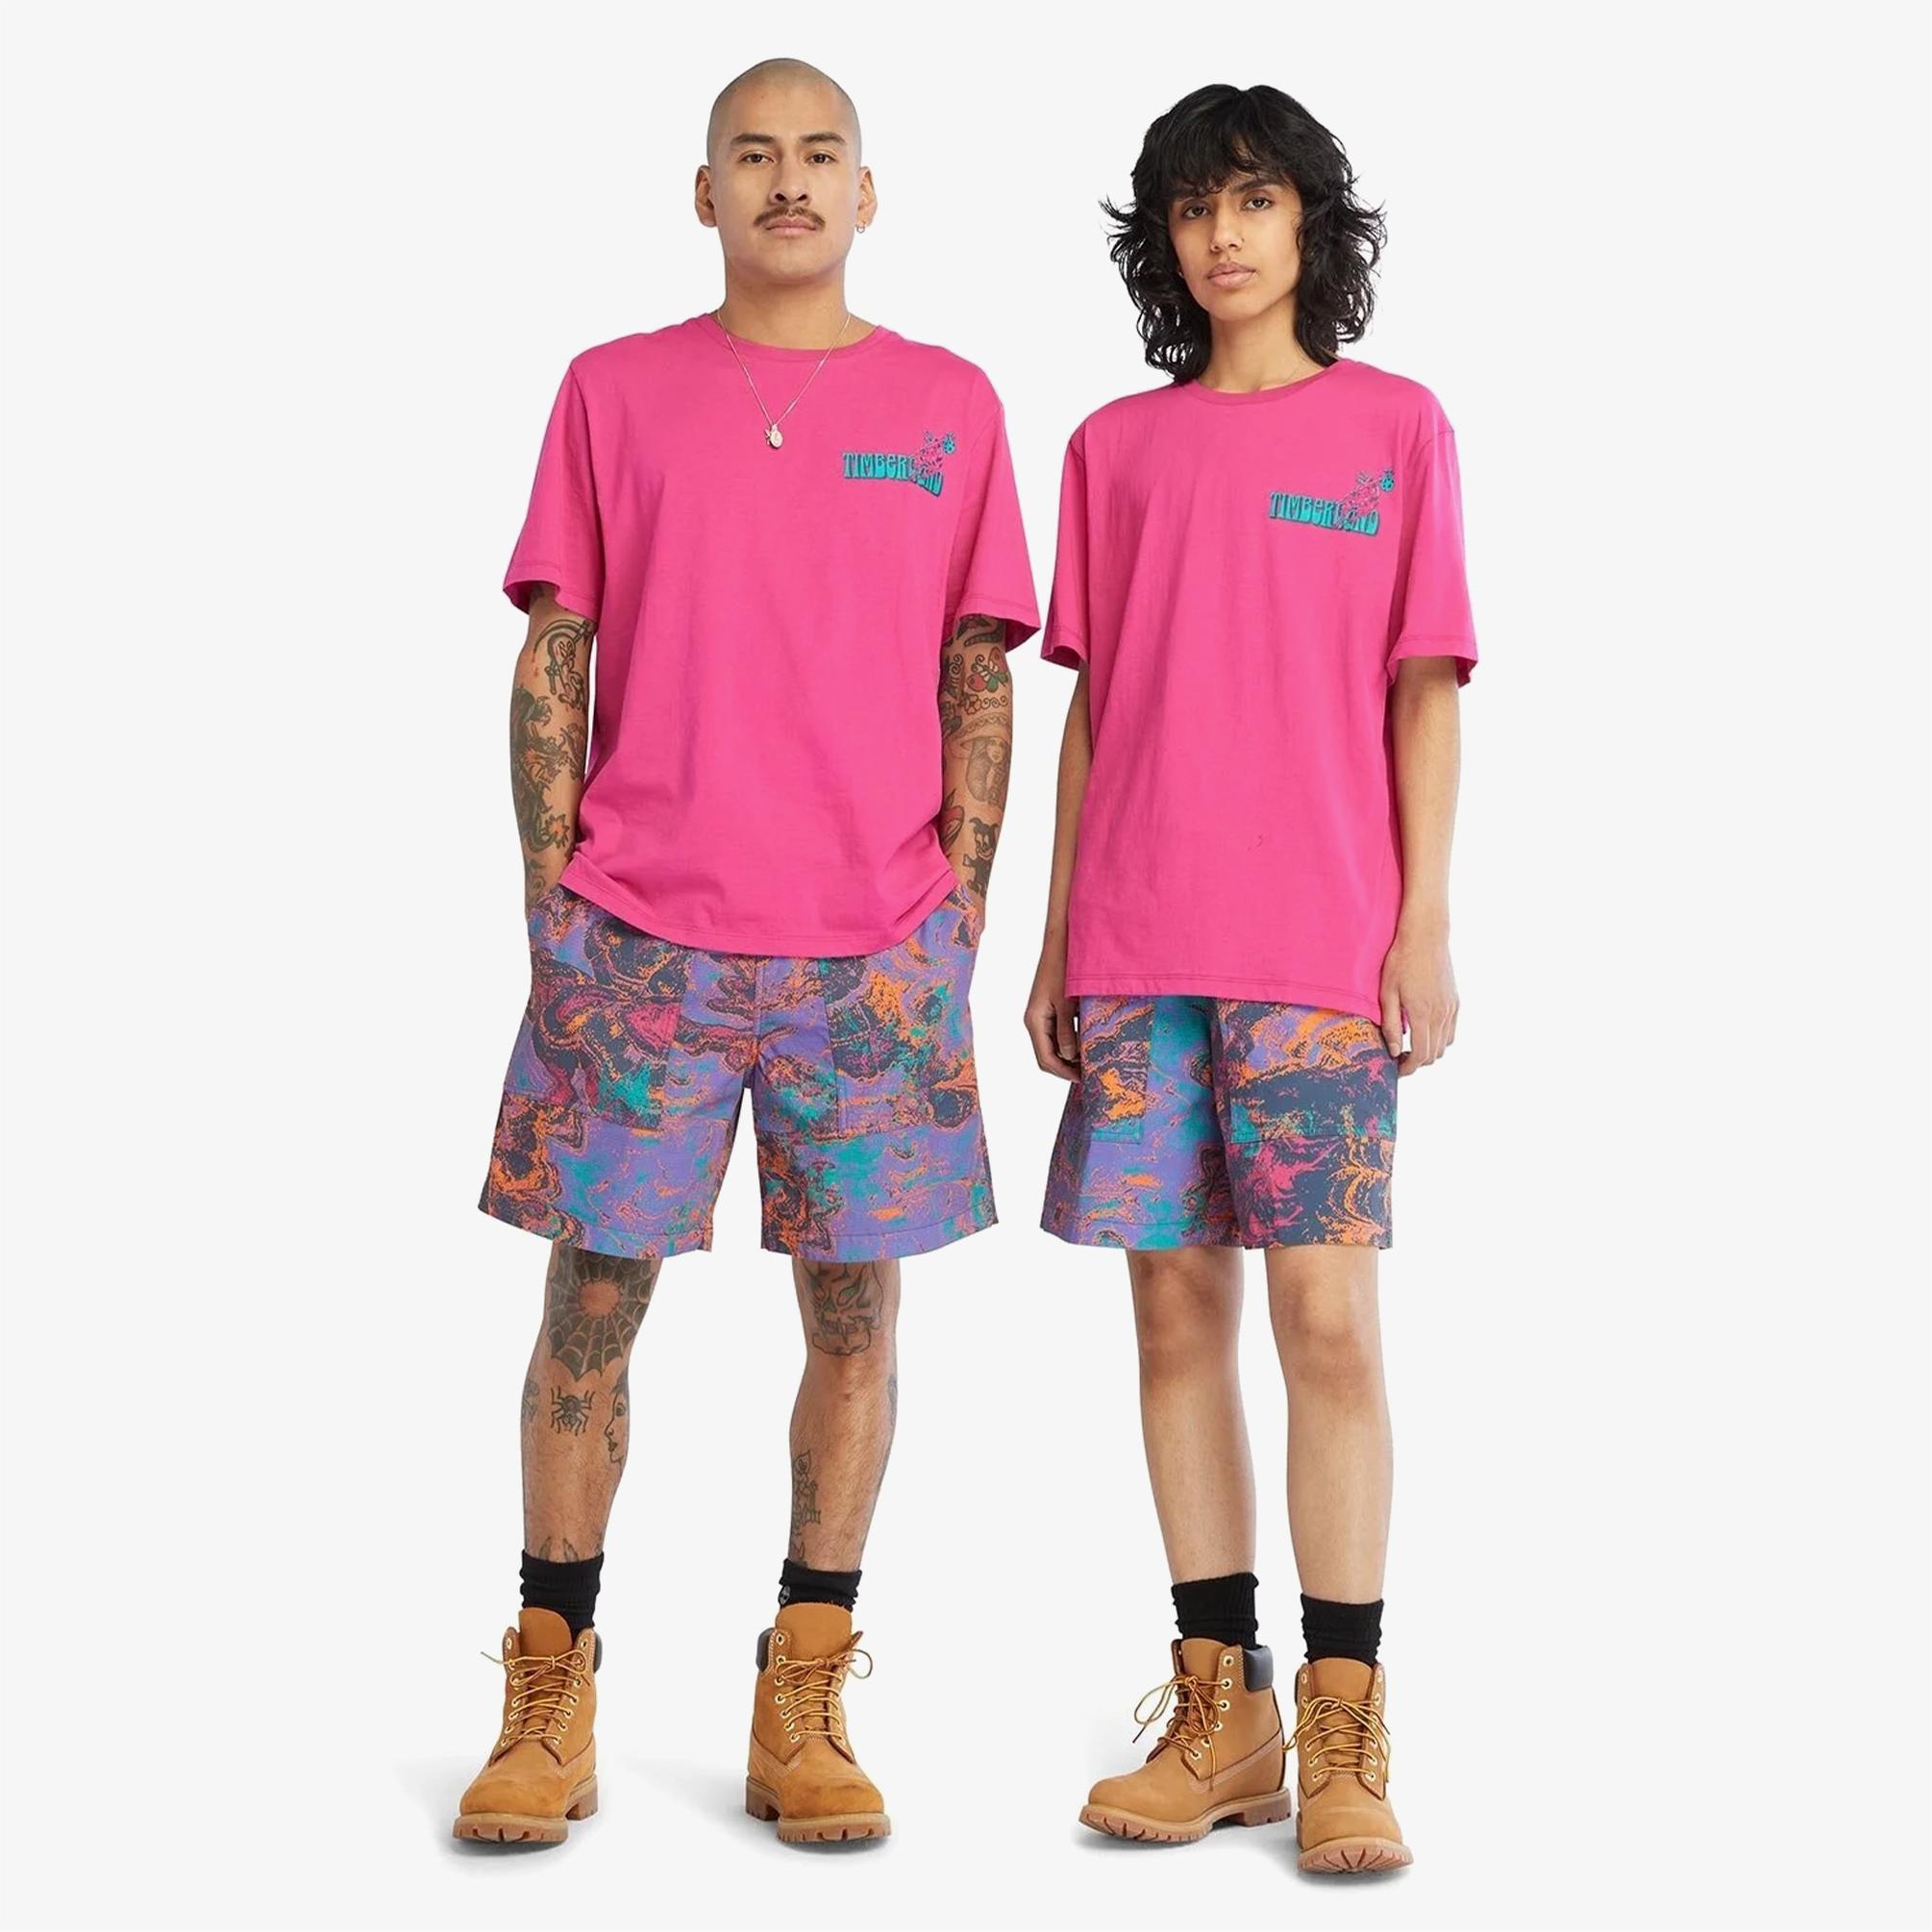  Timberland High Up In The Mountain Back Graphic Unisex Pembe T-Shirt